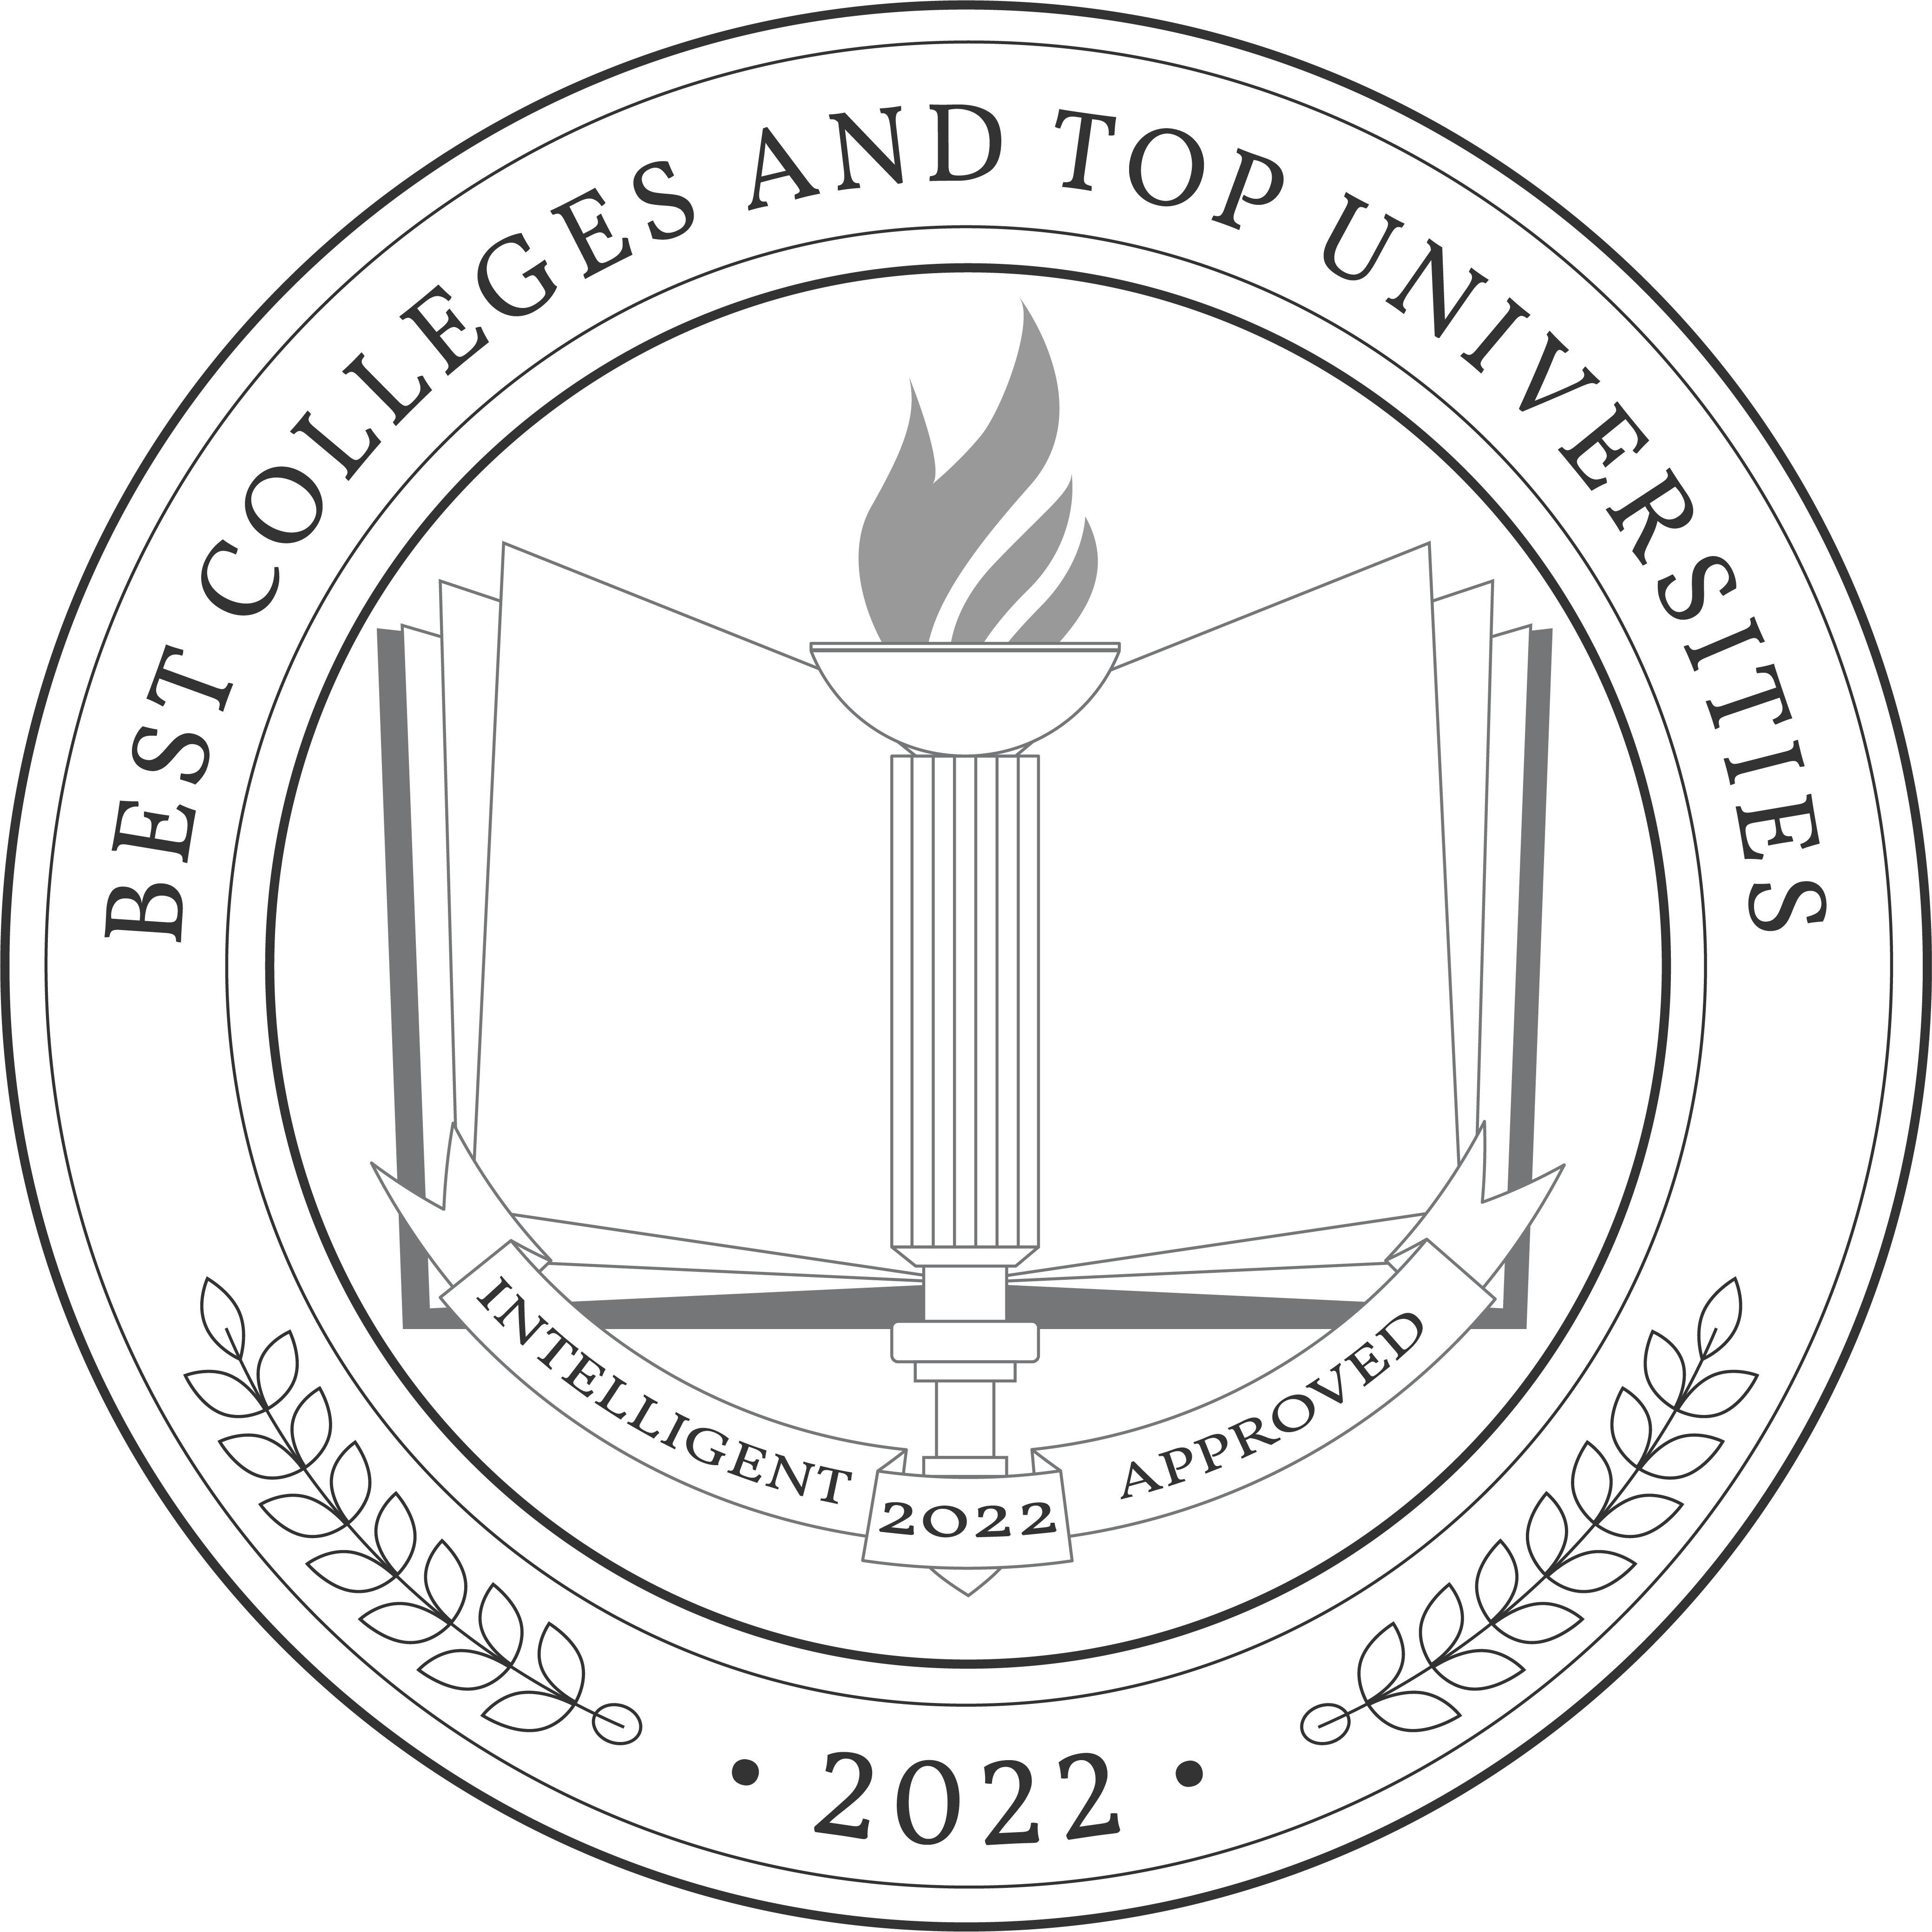 Best-Colleges-and-Top-Universities-Badge-image